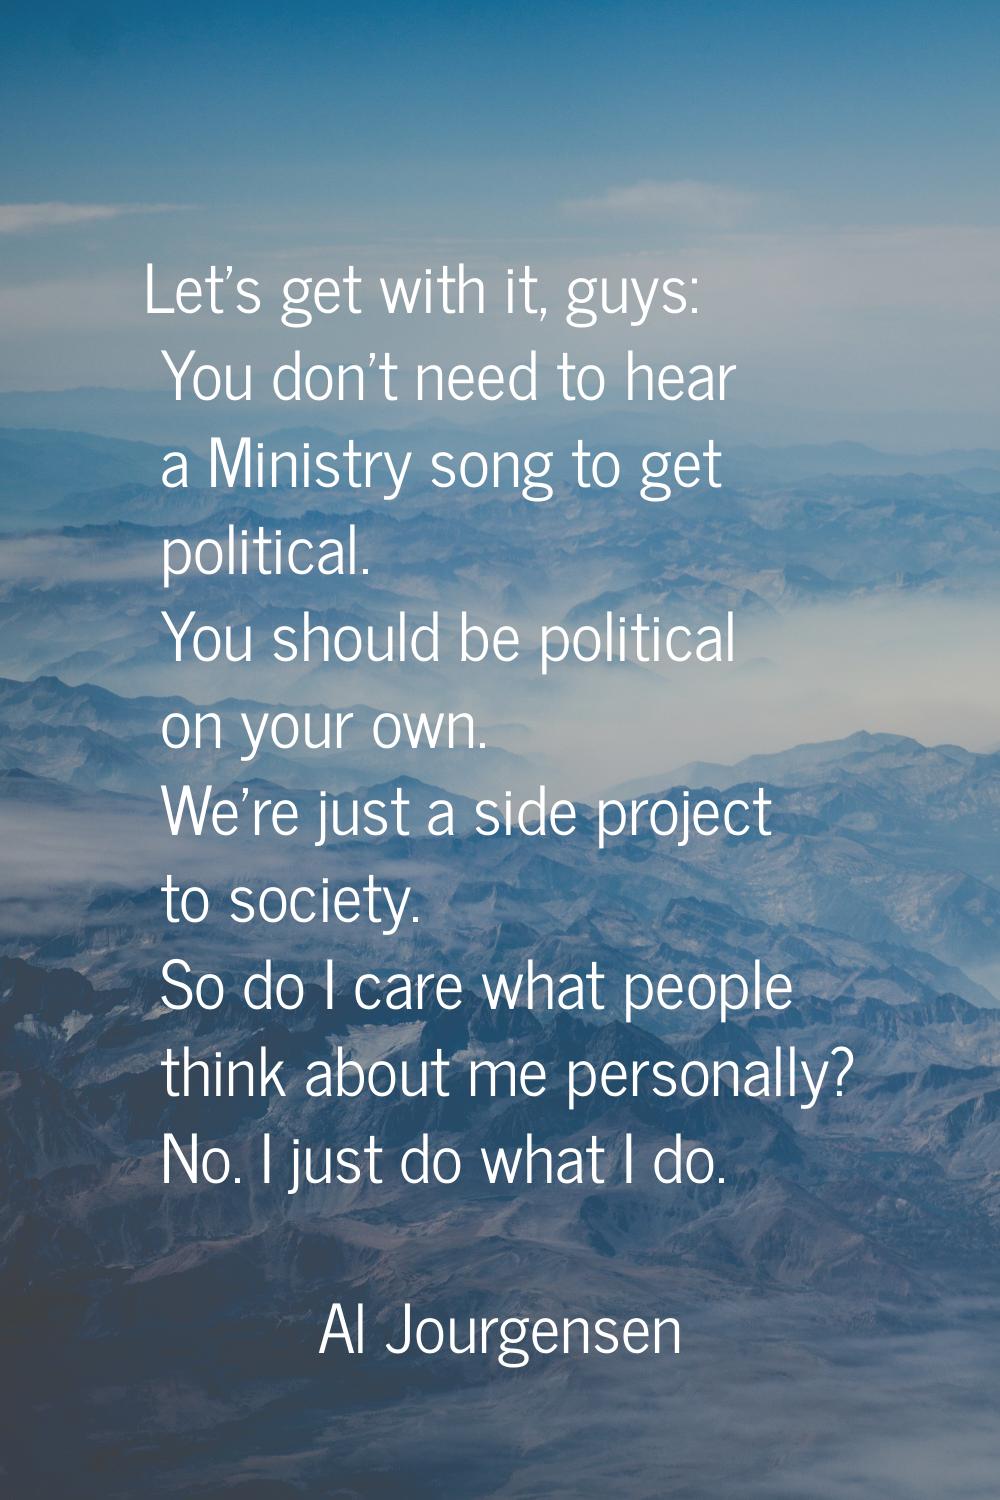 Let's get with it, guys: You don't need to hear a Ministry song to get political. You should be pol